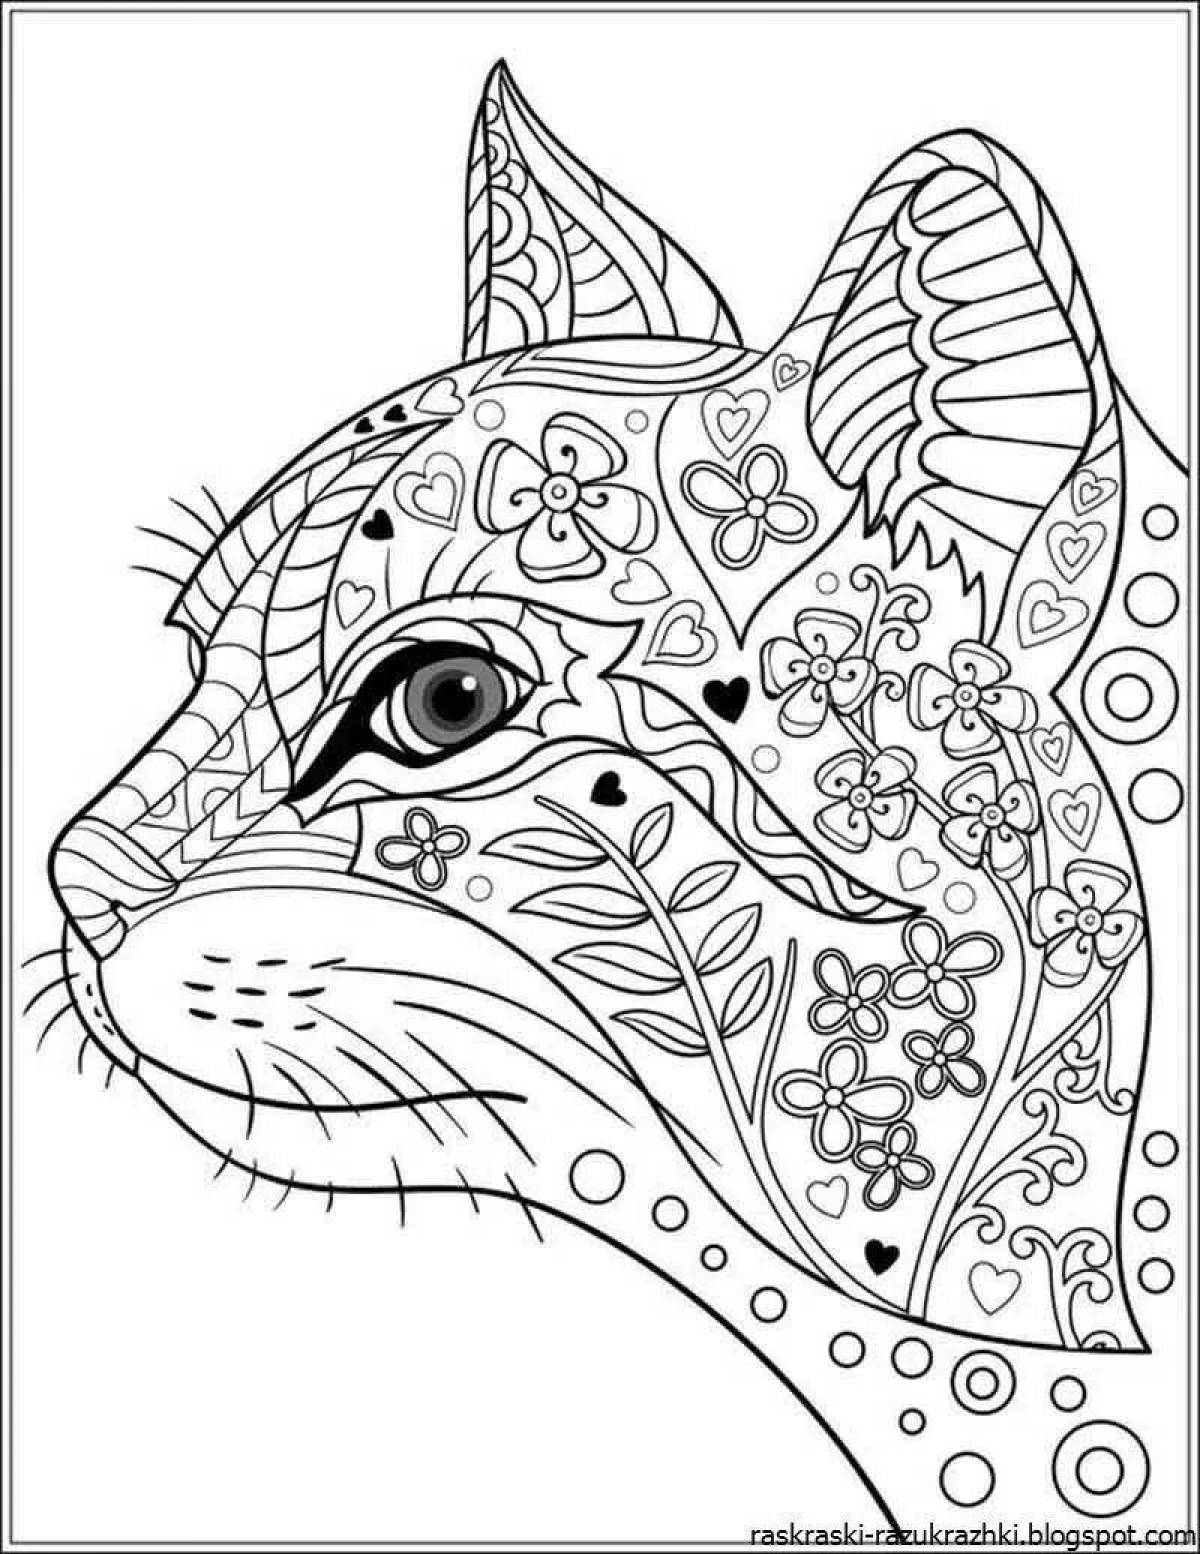 Relaxing coloring book for 10 years for girls antistress